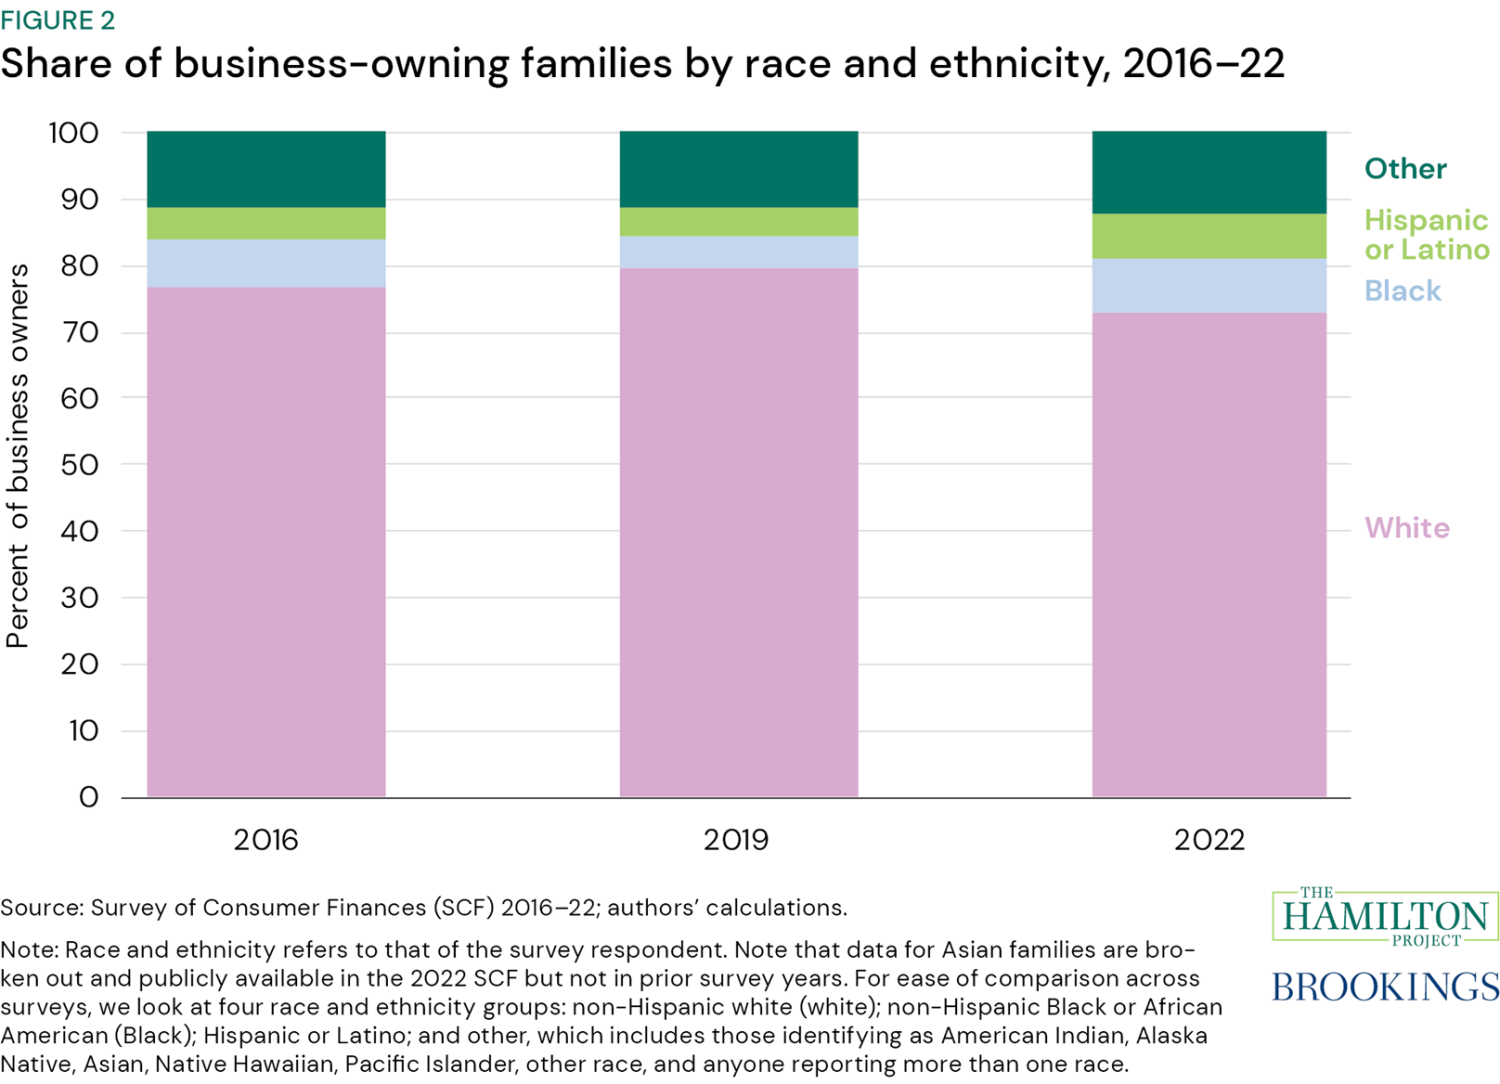 Figure 2: Share of business-owning families by race and ethnicity, 2016-22. Figure 2 shows the composition of owners of employer businesses by race and ethnicity.